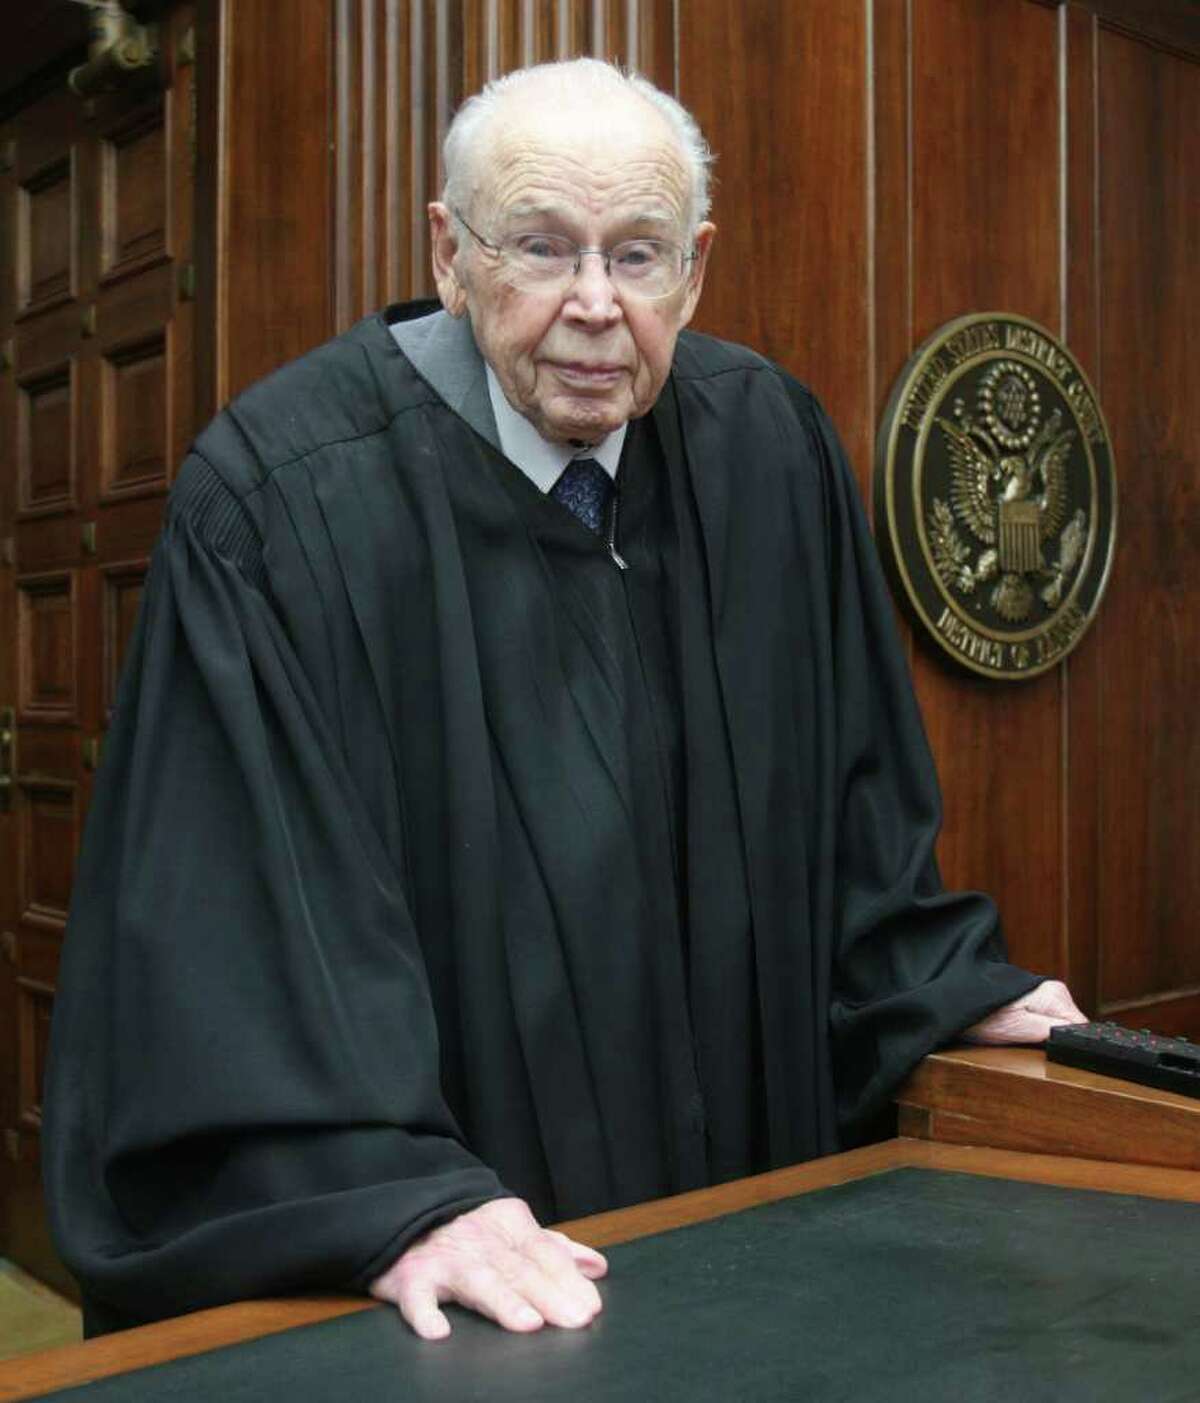 U.S. Federal District Judge Wesley Brown, seen here in 2007, took his lifetime judicial appointment seriously but had a sense of humor about himself.